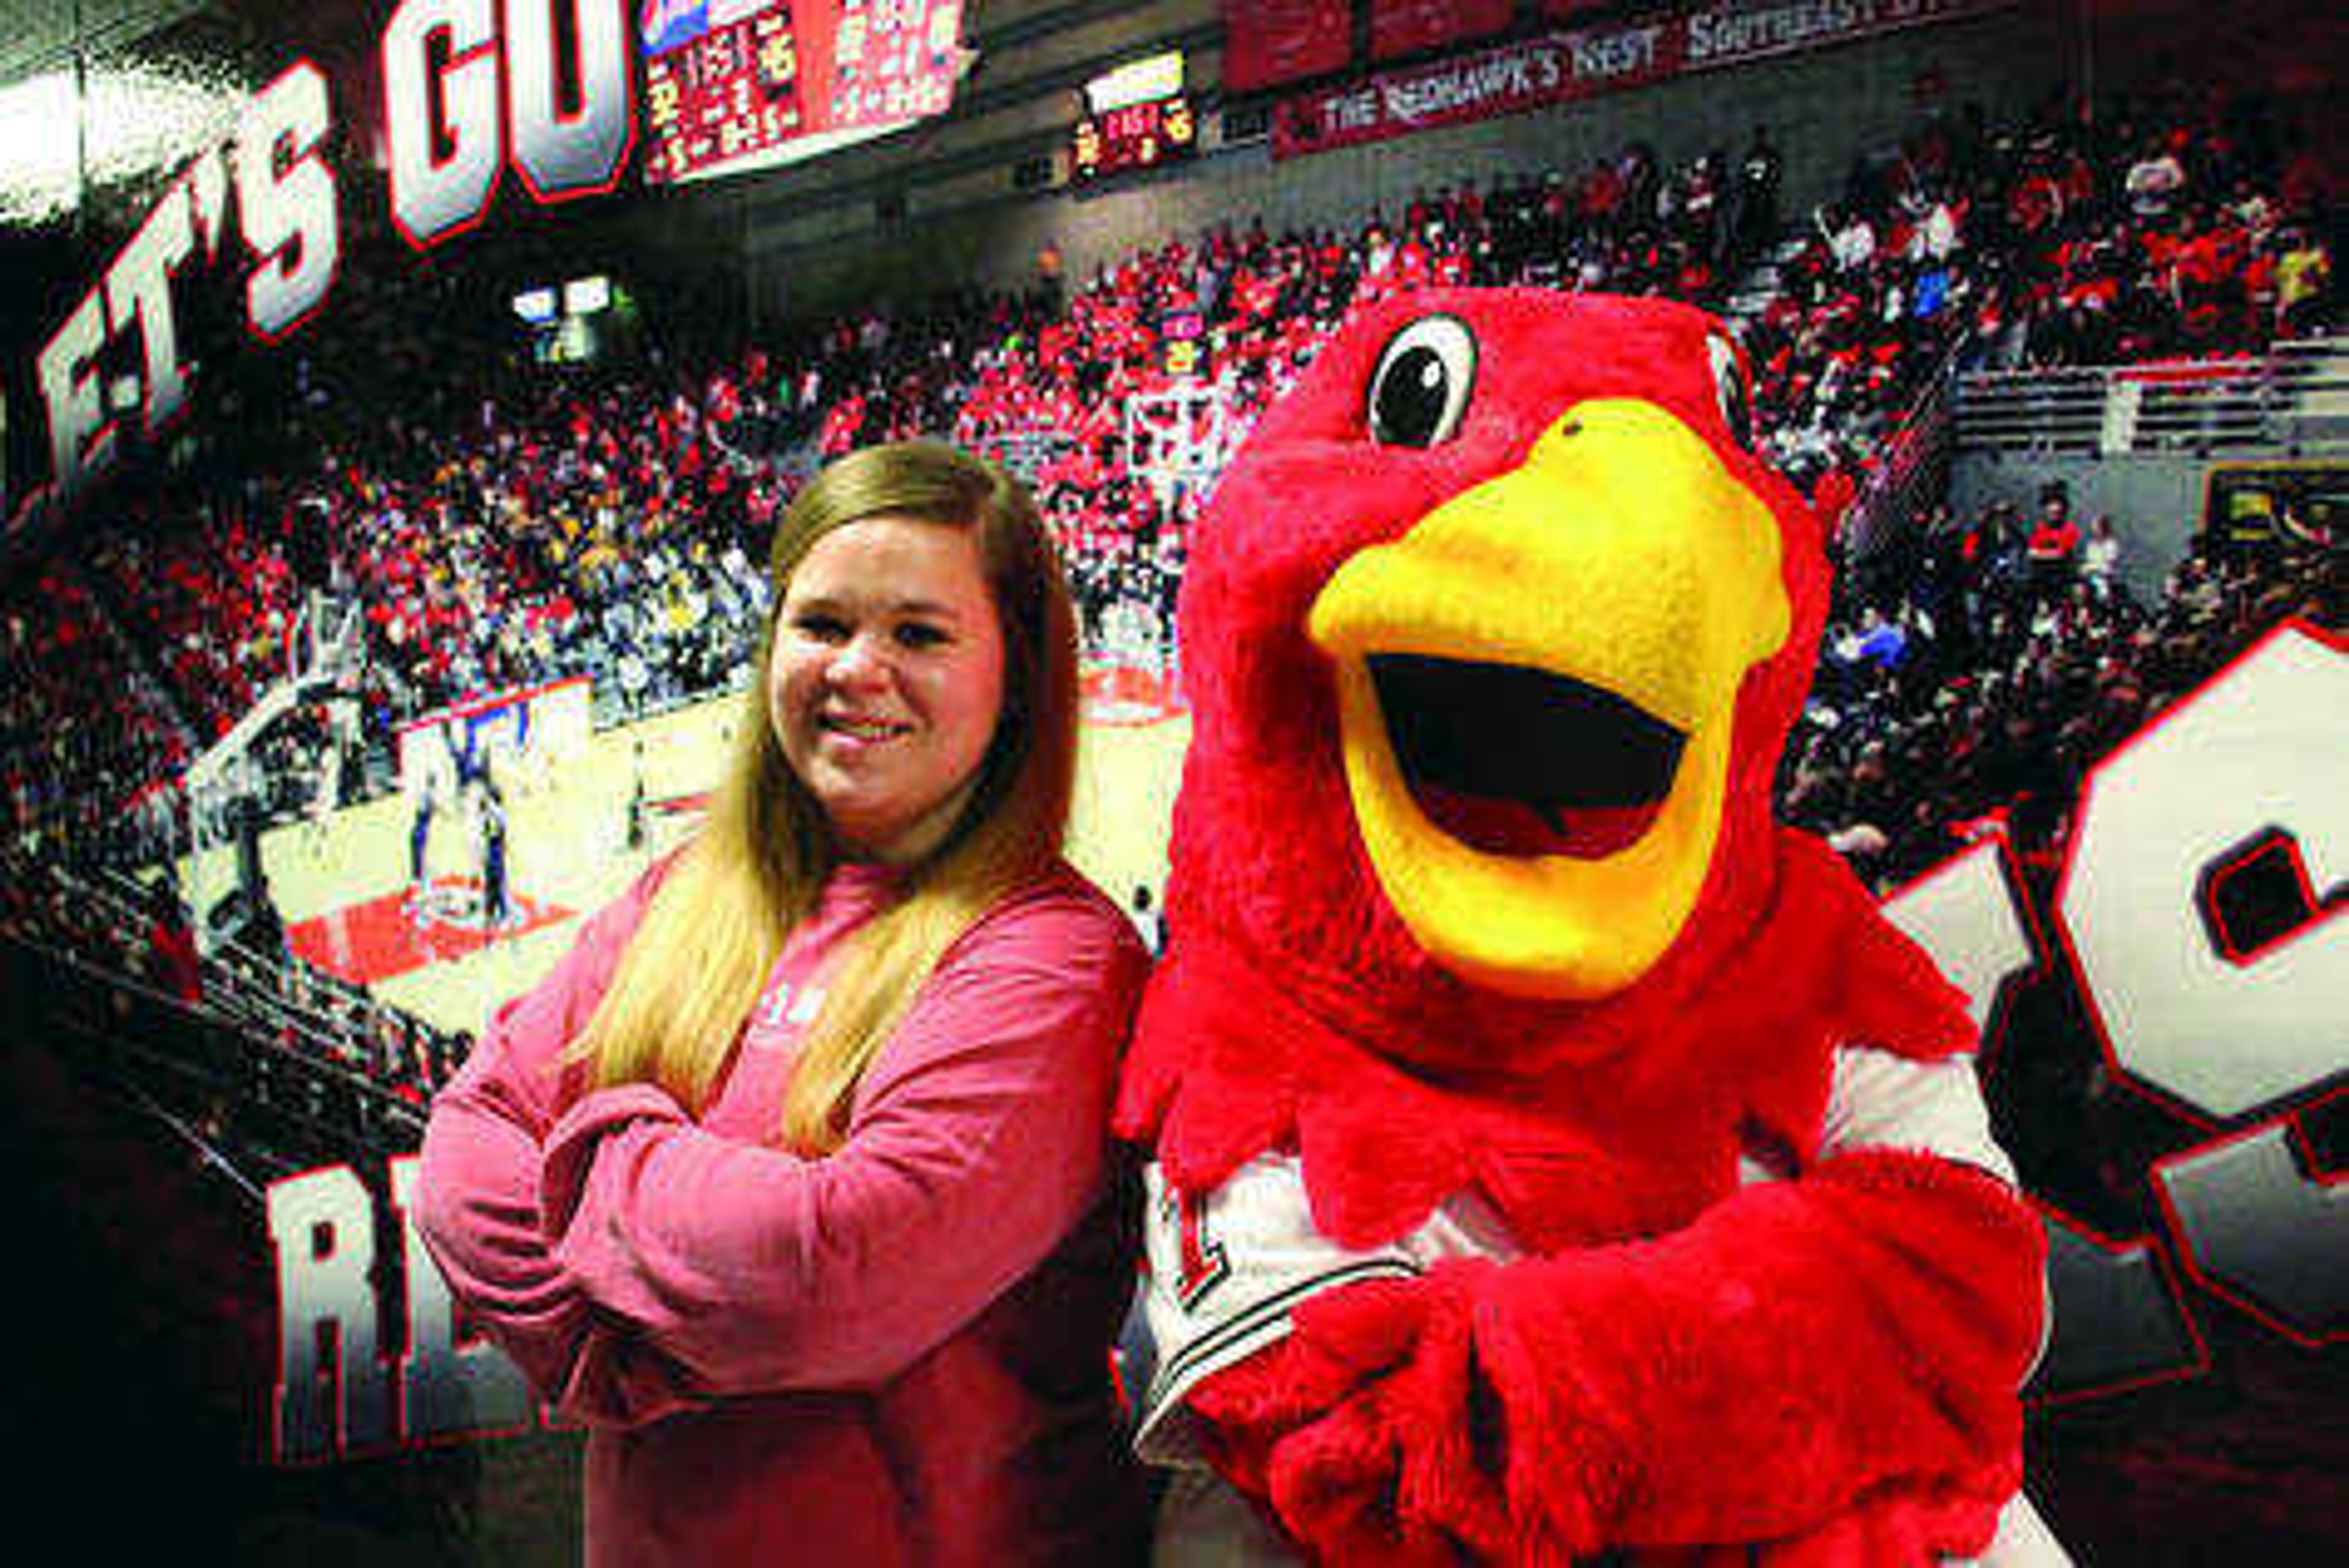 Behind the Beak: A Southeast student reveals her role as Rowdy the Redhawk